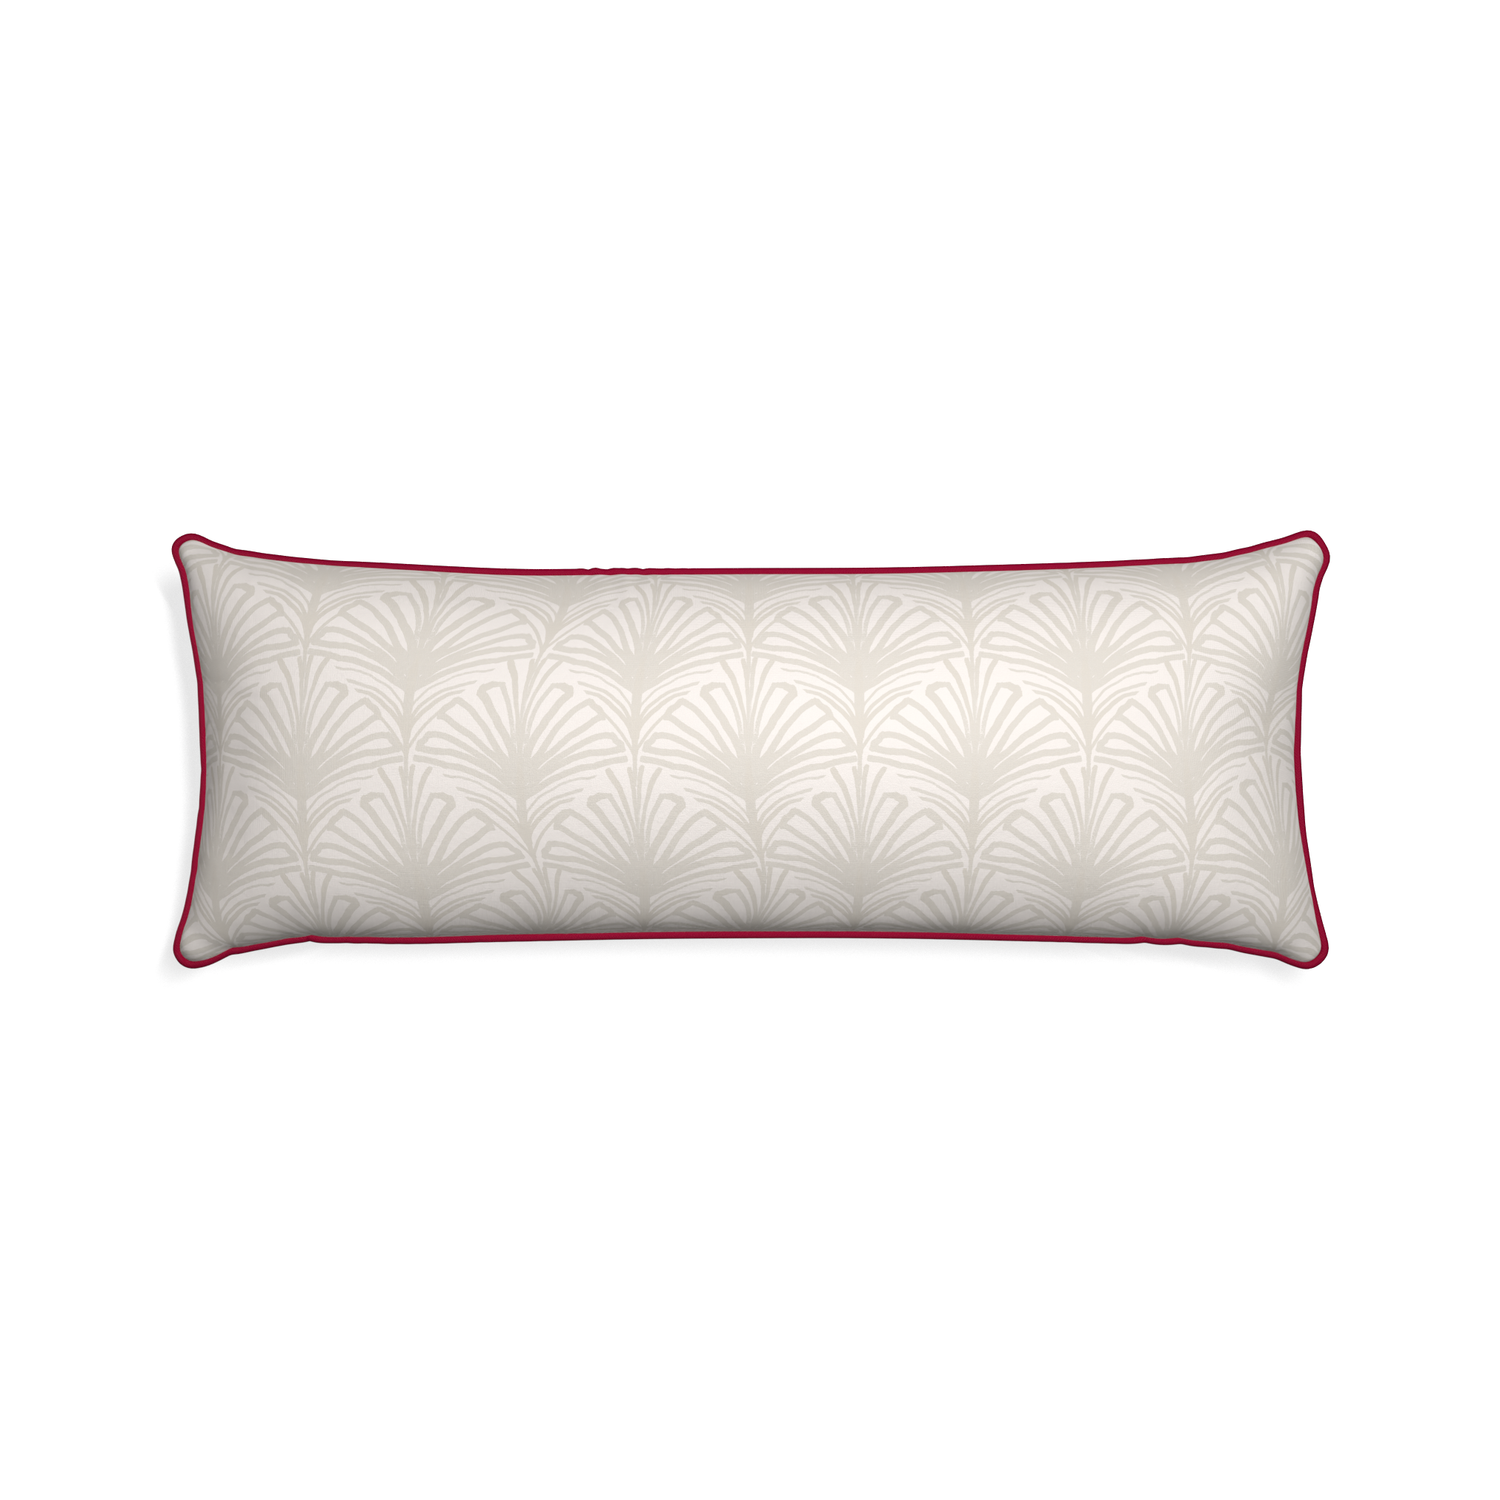 Xl-lumbar suzy sand custom pillow with raspberry piping on white background